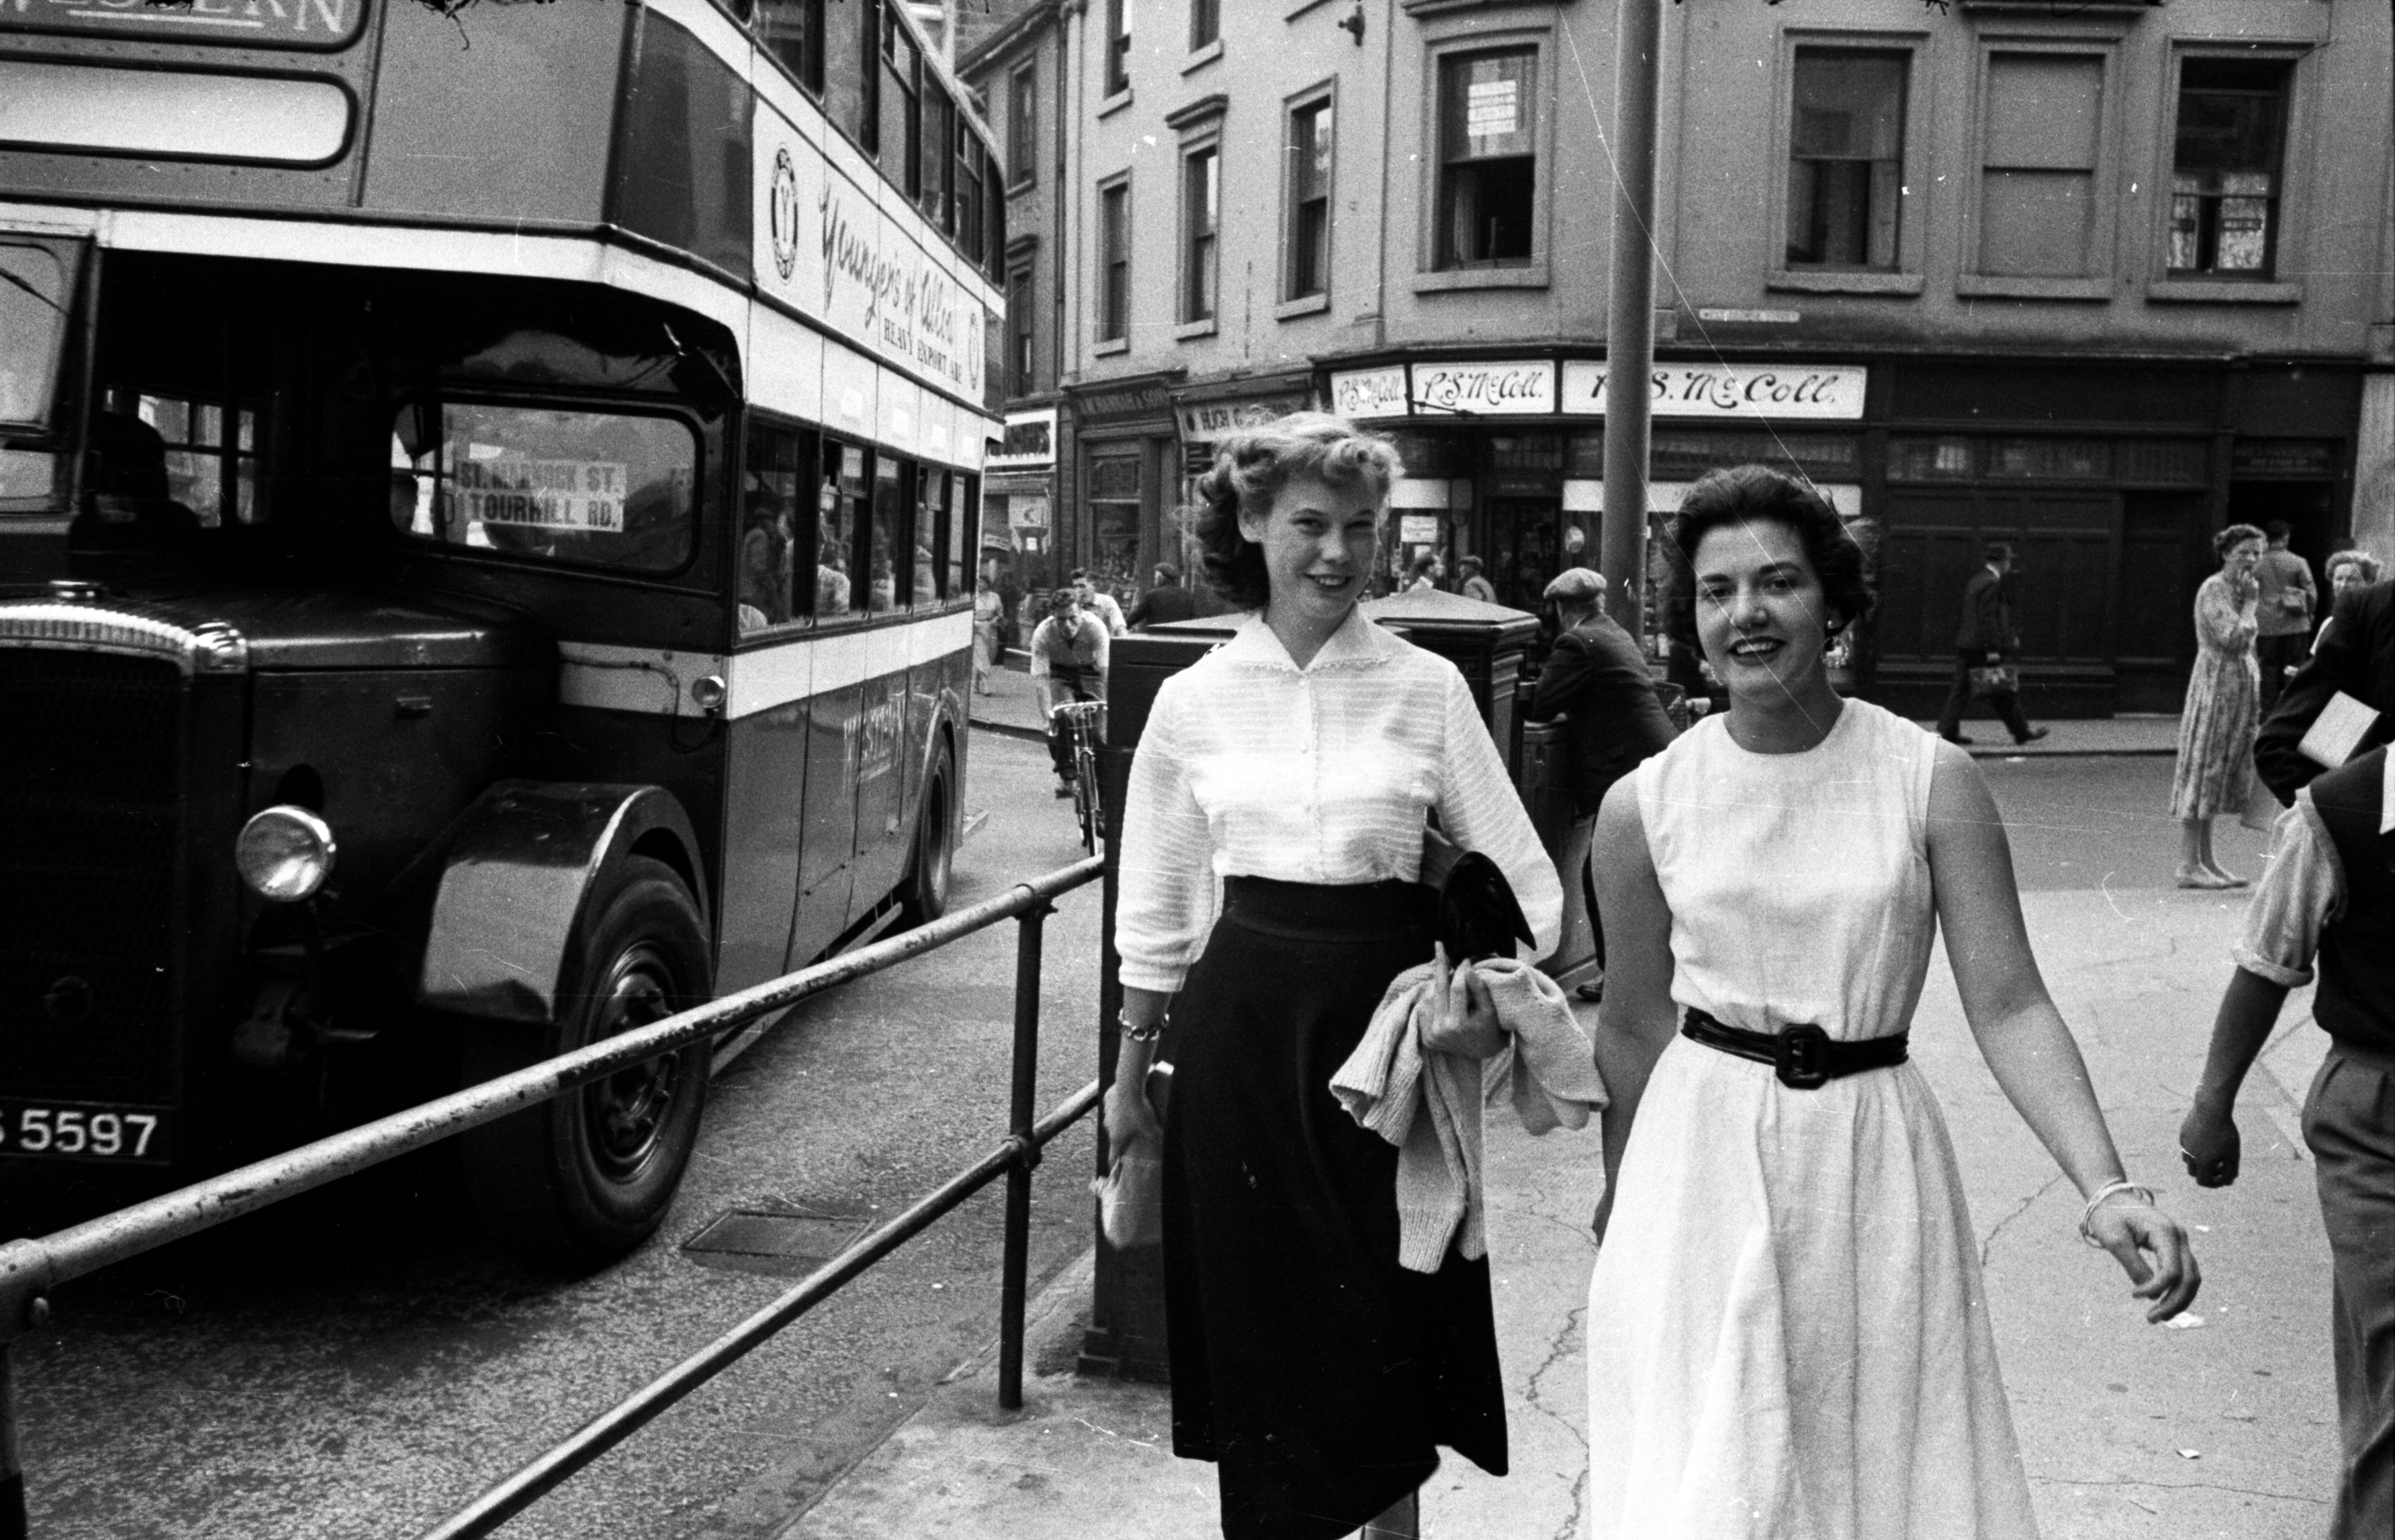 October 1 1955:  Two young women strolling down a busy street in the Scottish industrial town of Kilmarnock. Original Publication: Picture Post - 8024 - Is Auld Killie Slump-Proof? - pub. 1955  (Photo by Malcolm Dunbar/Picture Post/Hulton Archive/Getty Images)